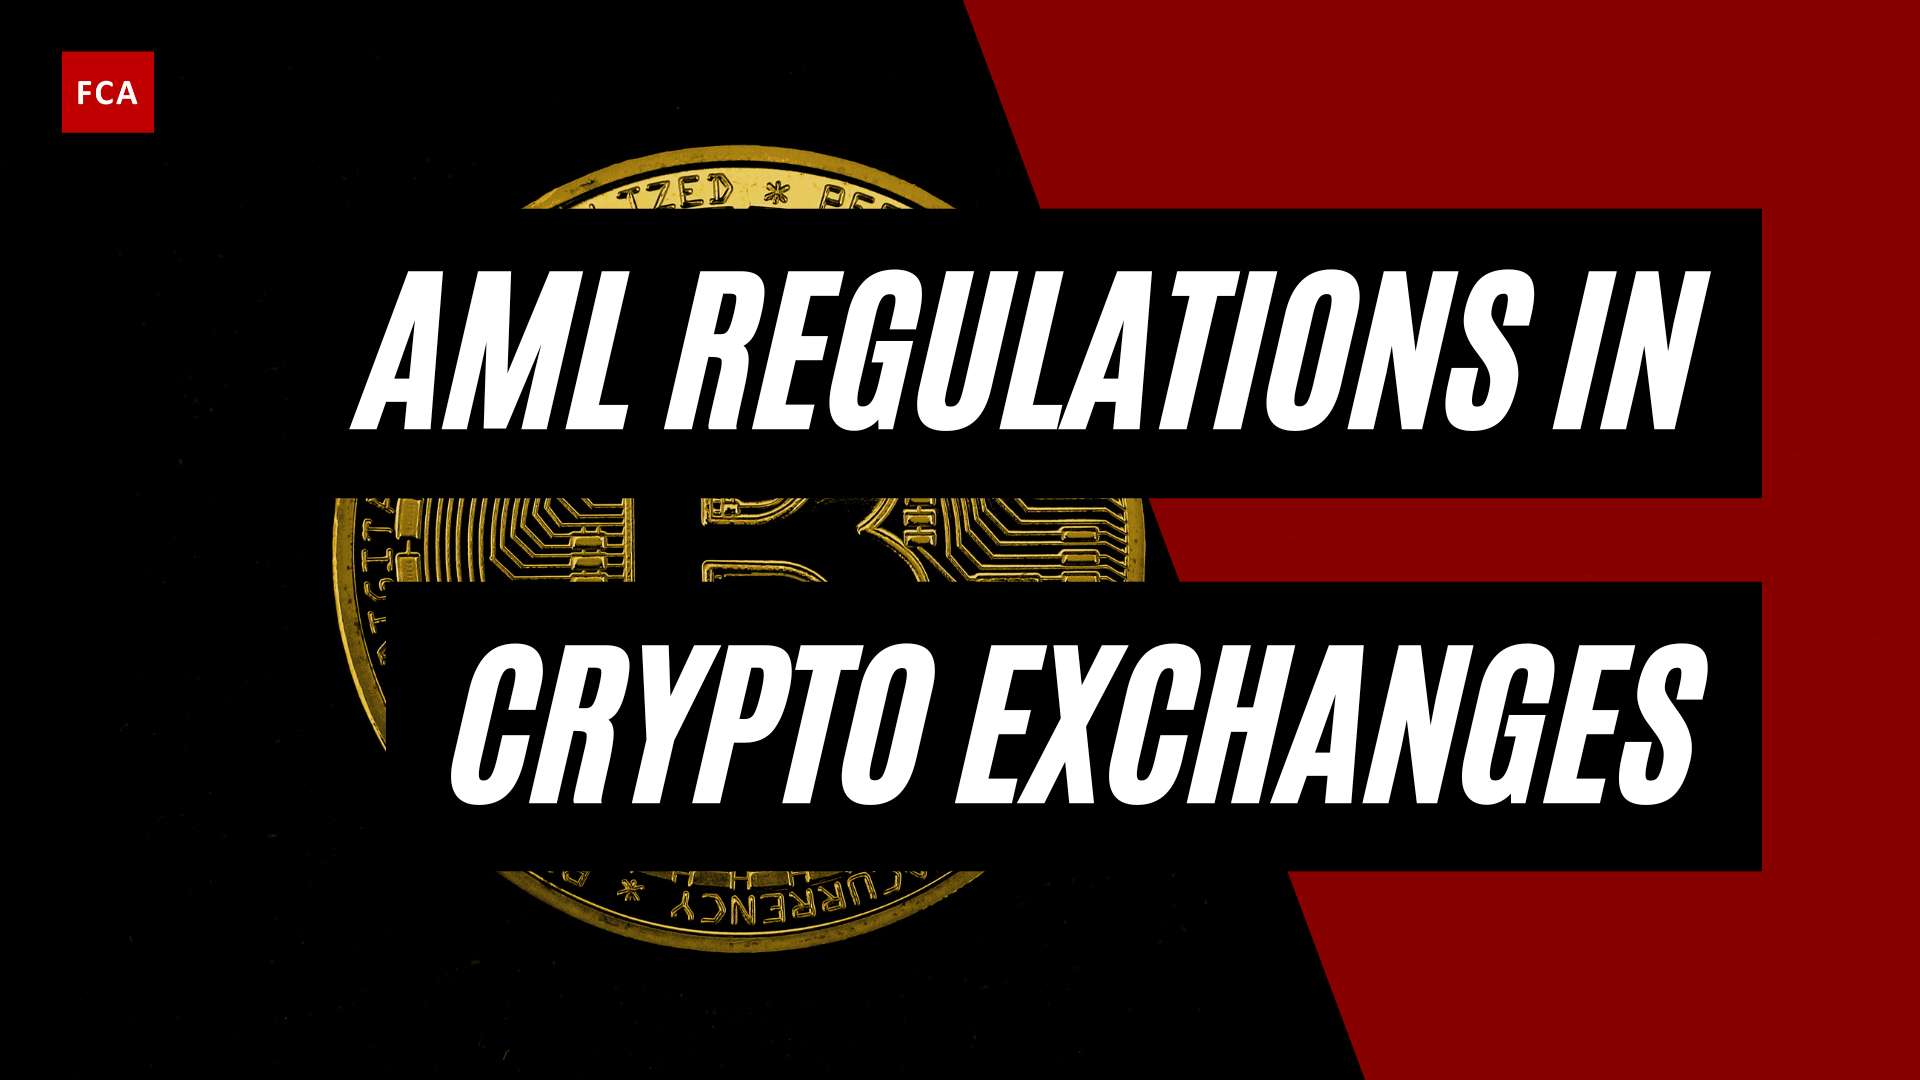 From Risk To Compliance: Harnessing Kyc Procedures For Cryptocurrency Exchanges